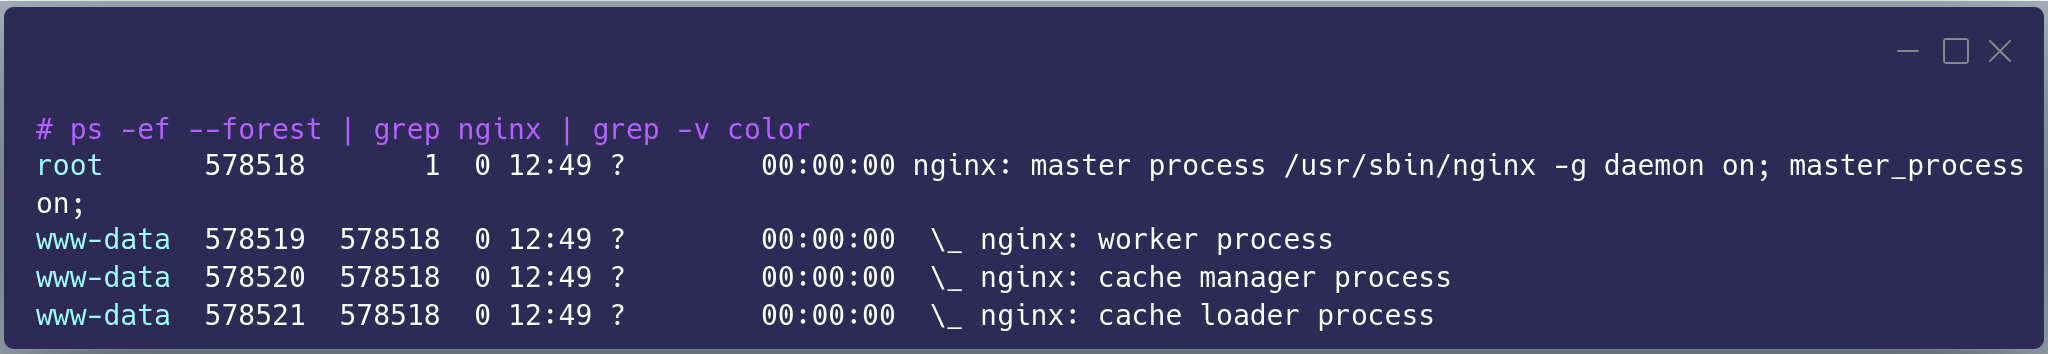 Nginx and its workers with some random facts